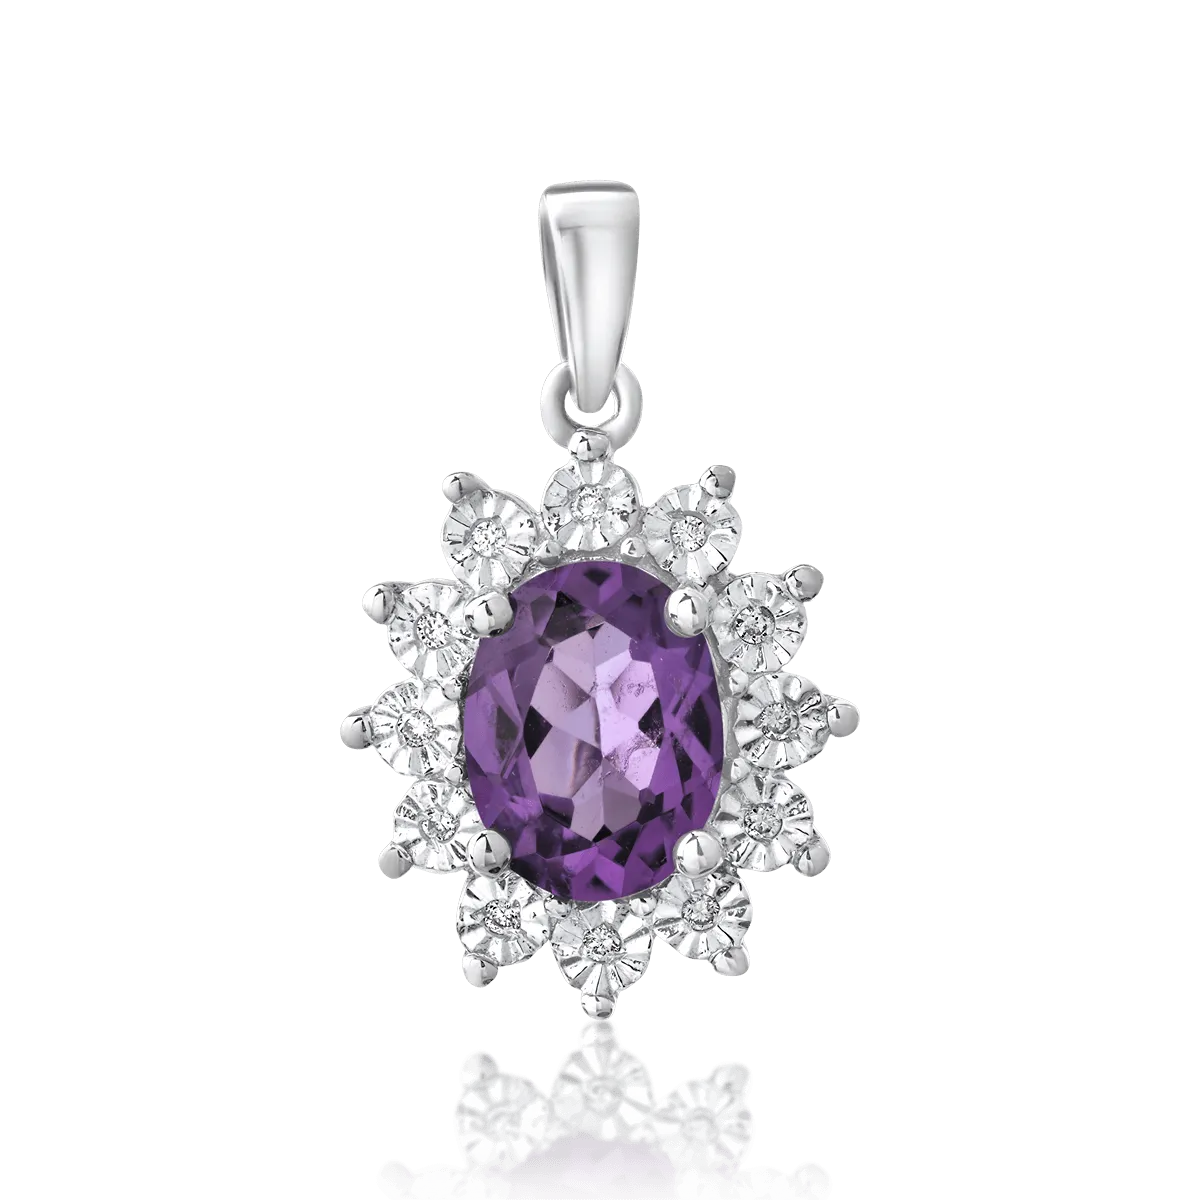 14K white gold pendant with 1.07ct amethyst and 0.03ct diamonds